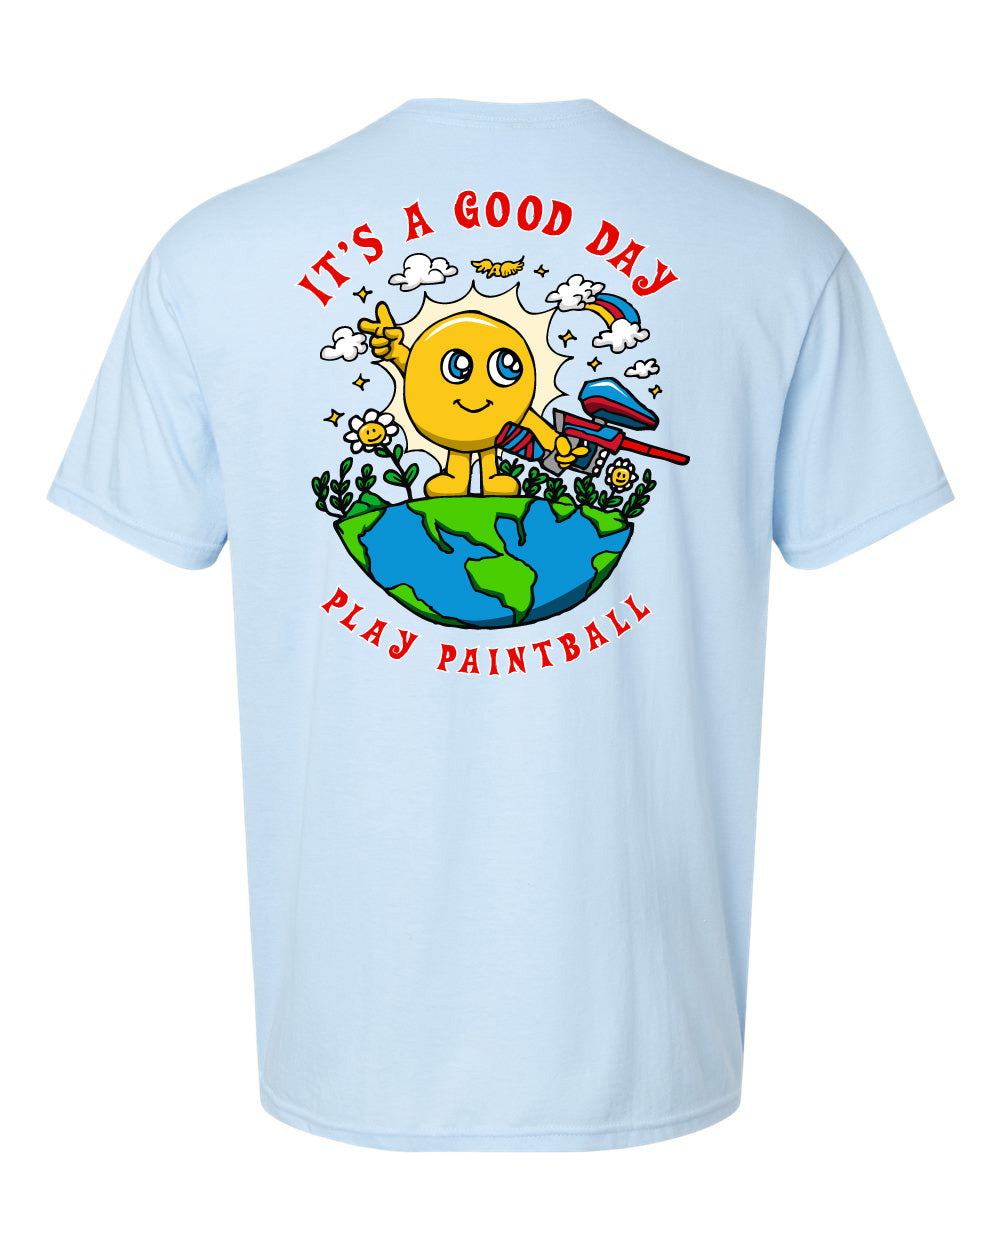 It's a good day, Play Paintball T- shirt